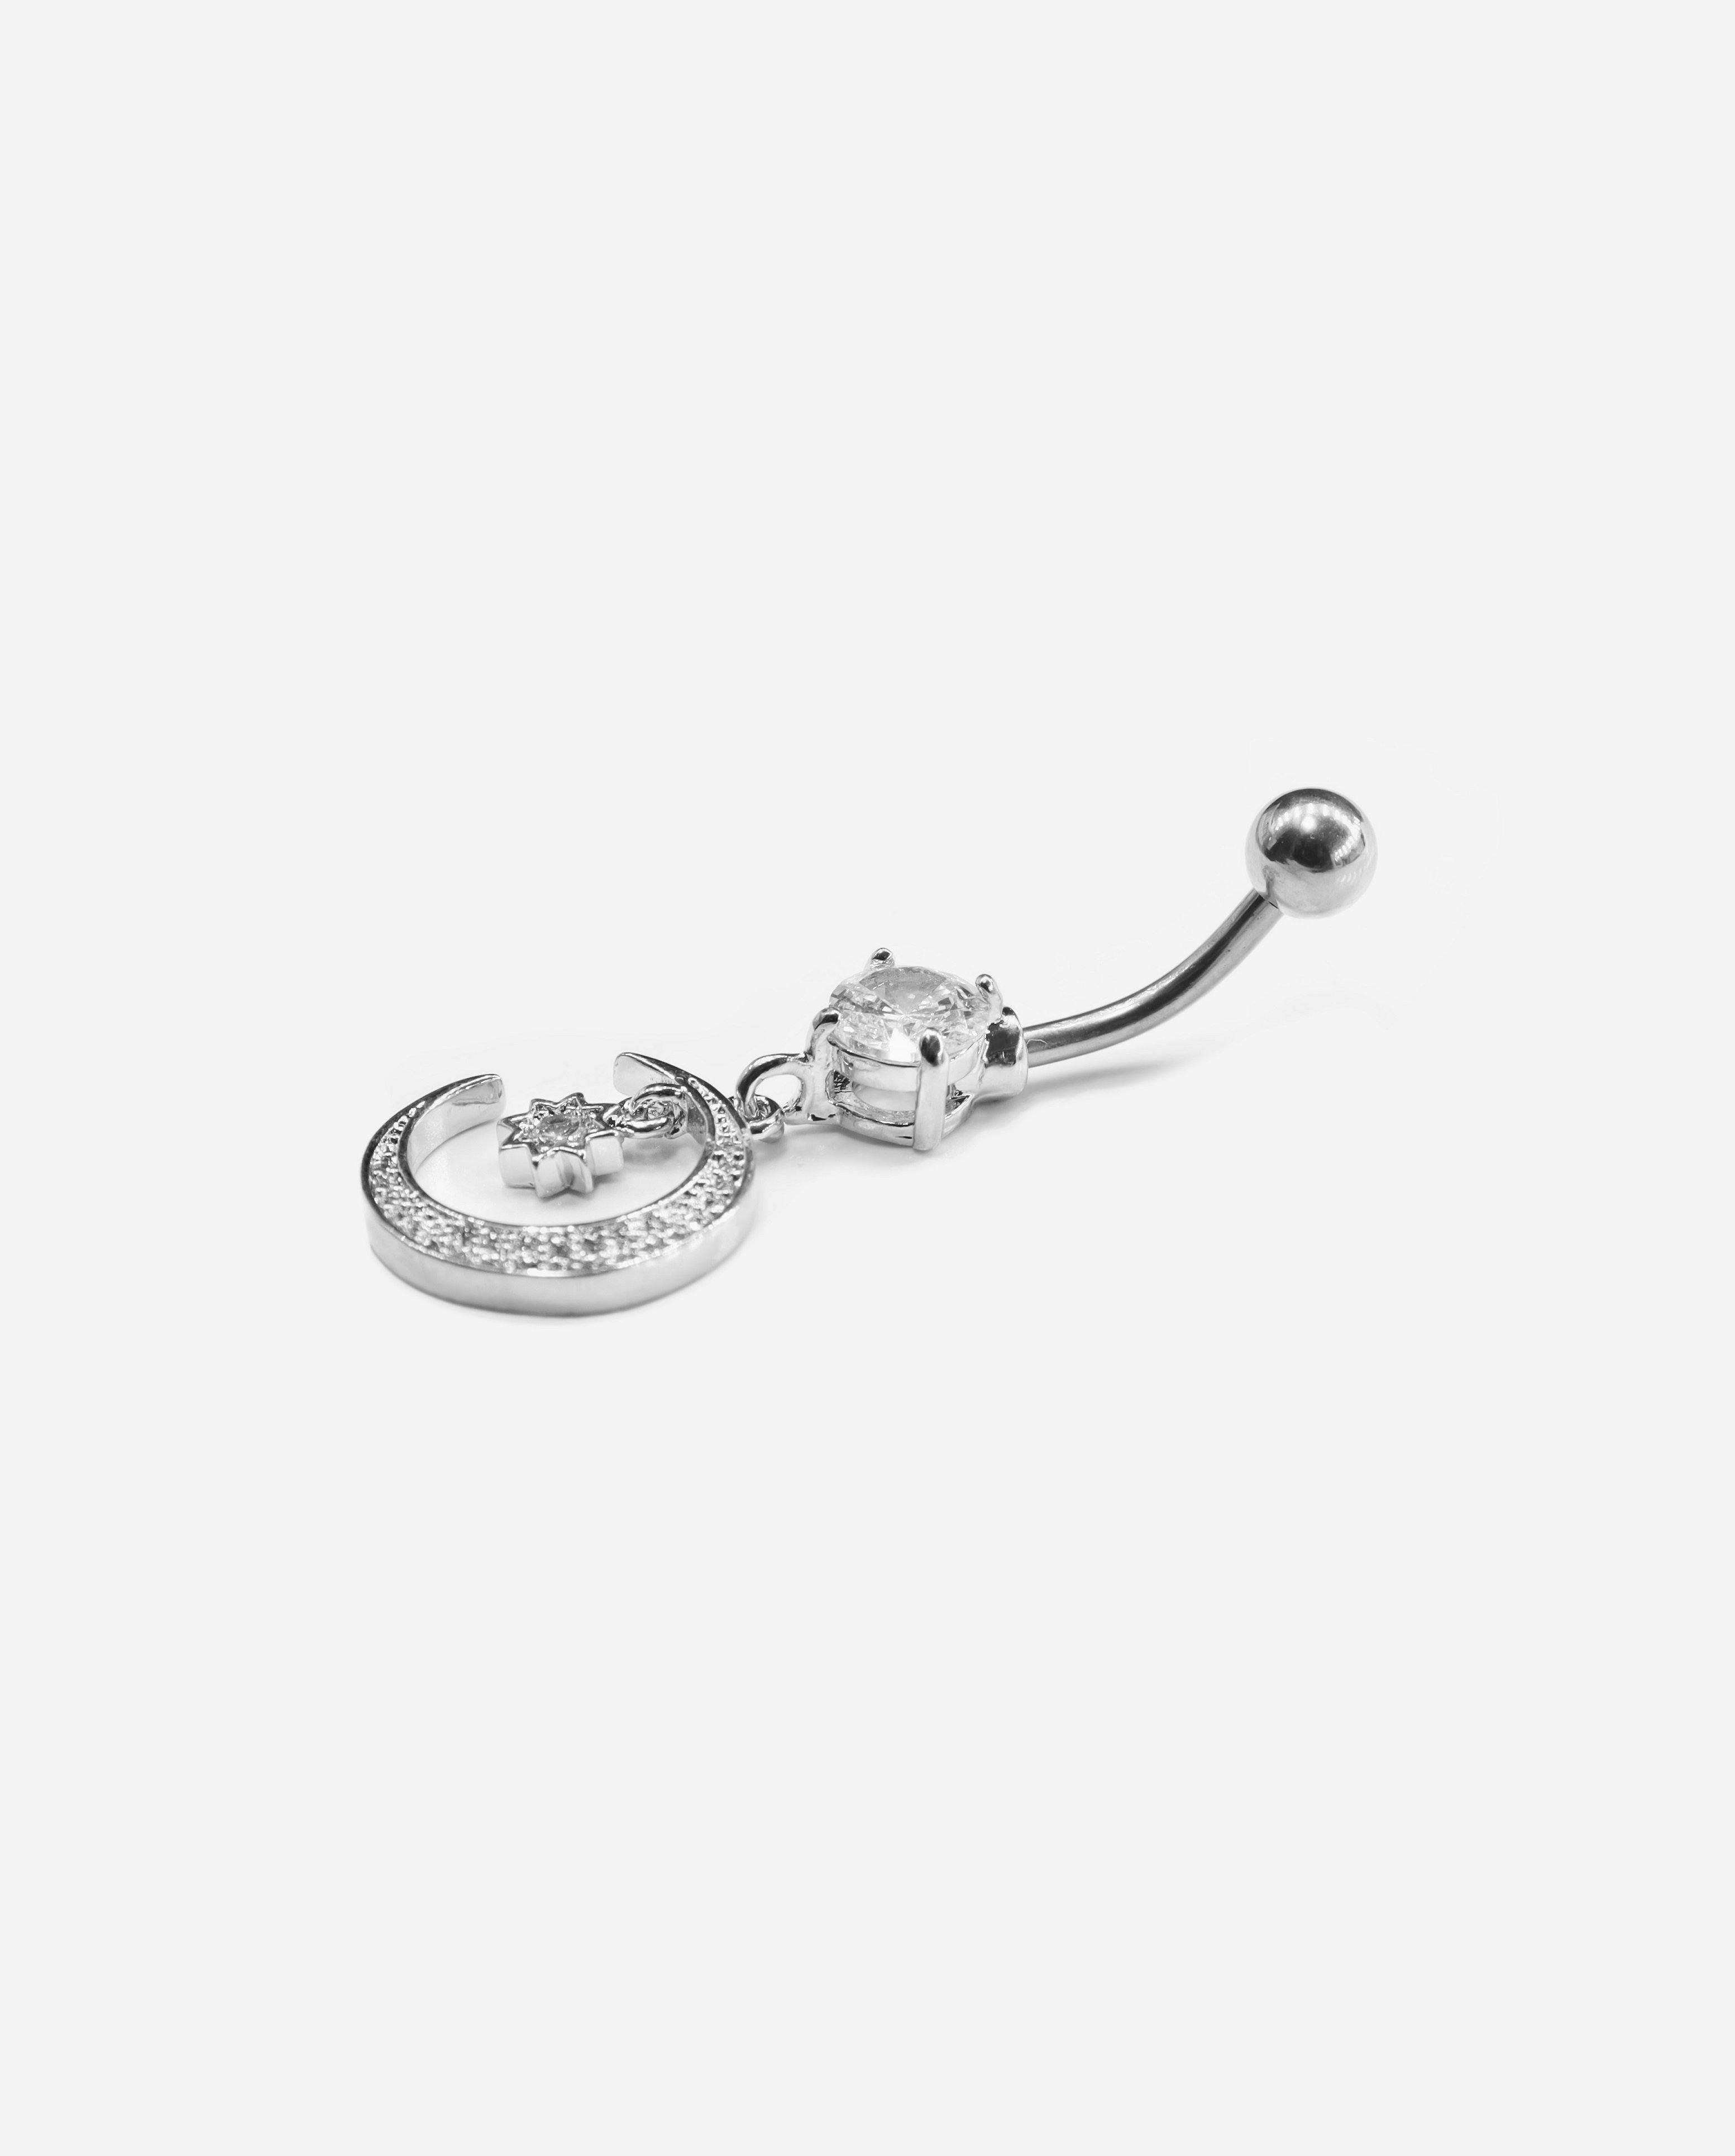 Gracias Dios Iced Moon Crystal Dangle Belly Ring - Challenger Streetwear